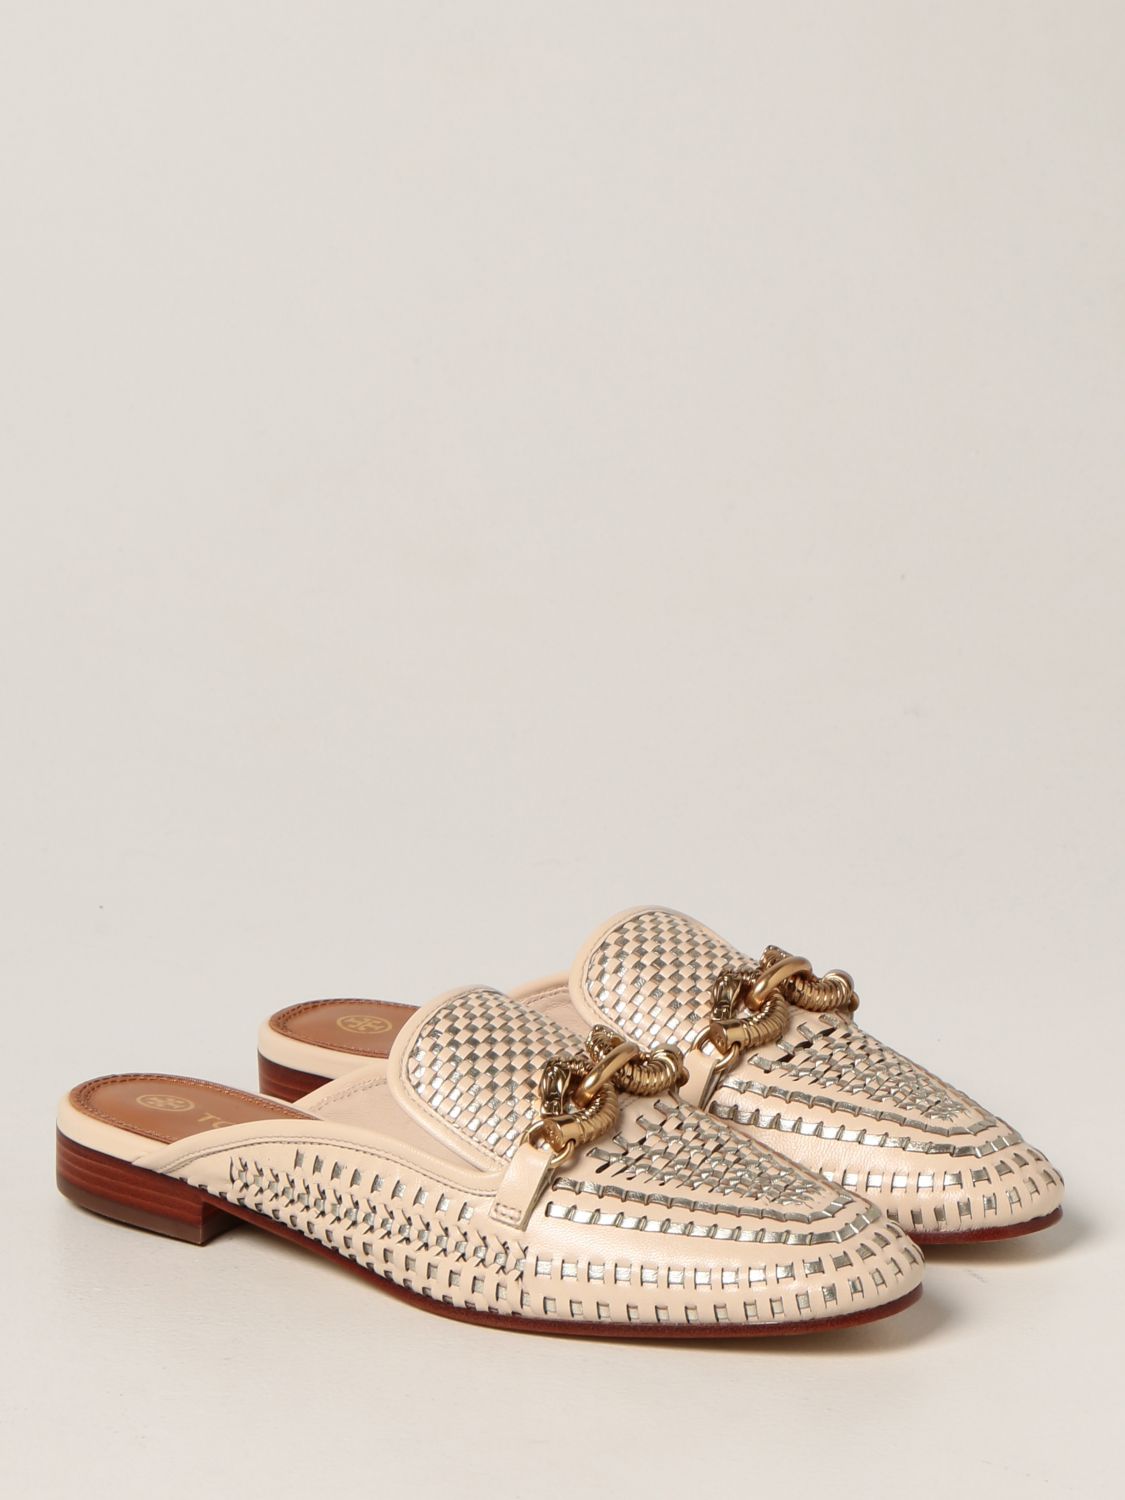 TORY BURCH: Jessa sabots in woven leather - Ivory | Tory Burch flat ...